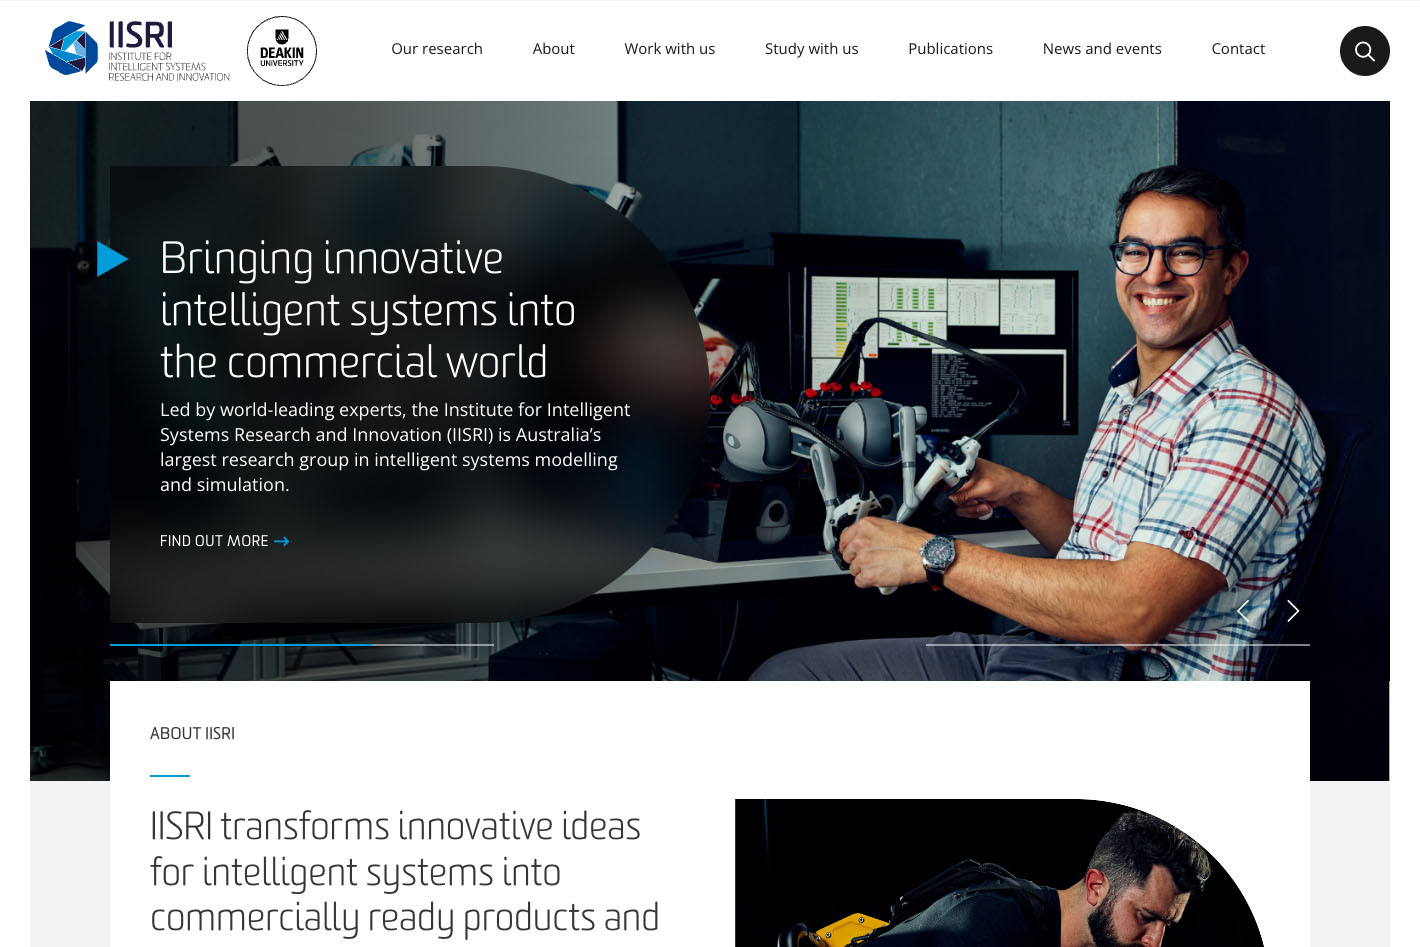 Screengrab of he Institute of Intelligent Systems Research & Innovation website homepage.